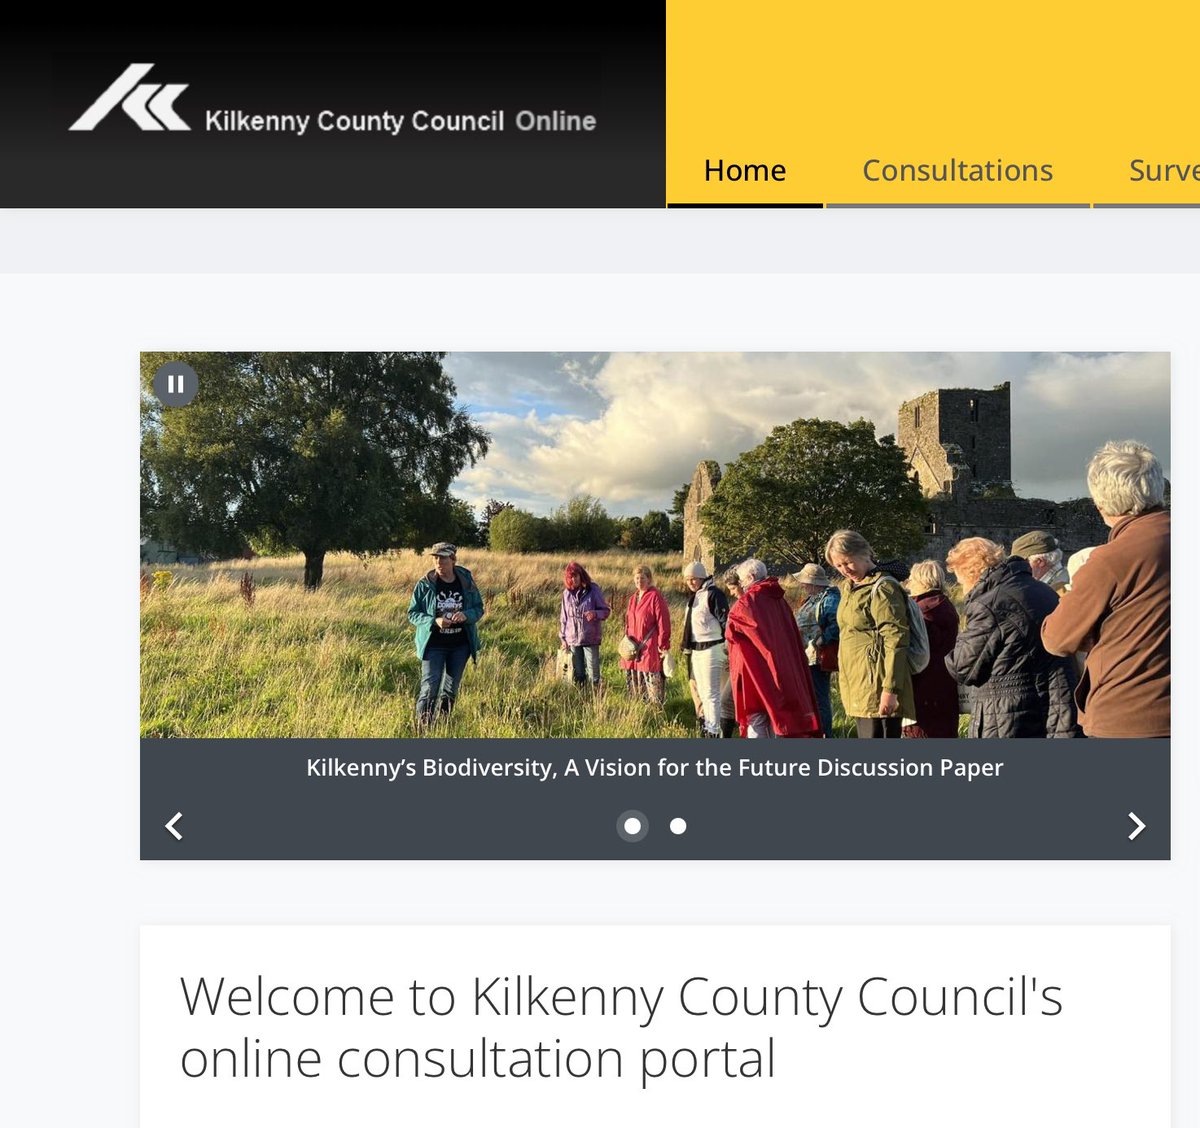 Kilkenny County Council would like to hear your views on nature, listen to your ideas on how we should be addressing #biodiversity loss. See #Kilkenny County Council’s public consultation portal: consult.kilkenny.ie @KilkennyPPN @KilkennyChamber @KilkennyNotices